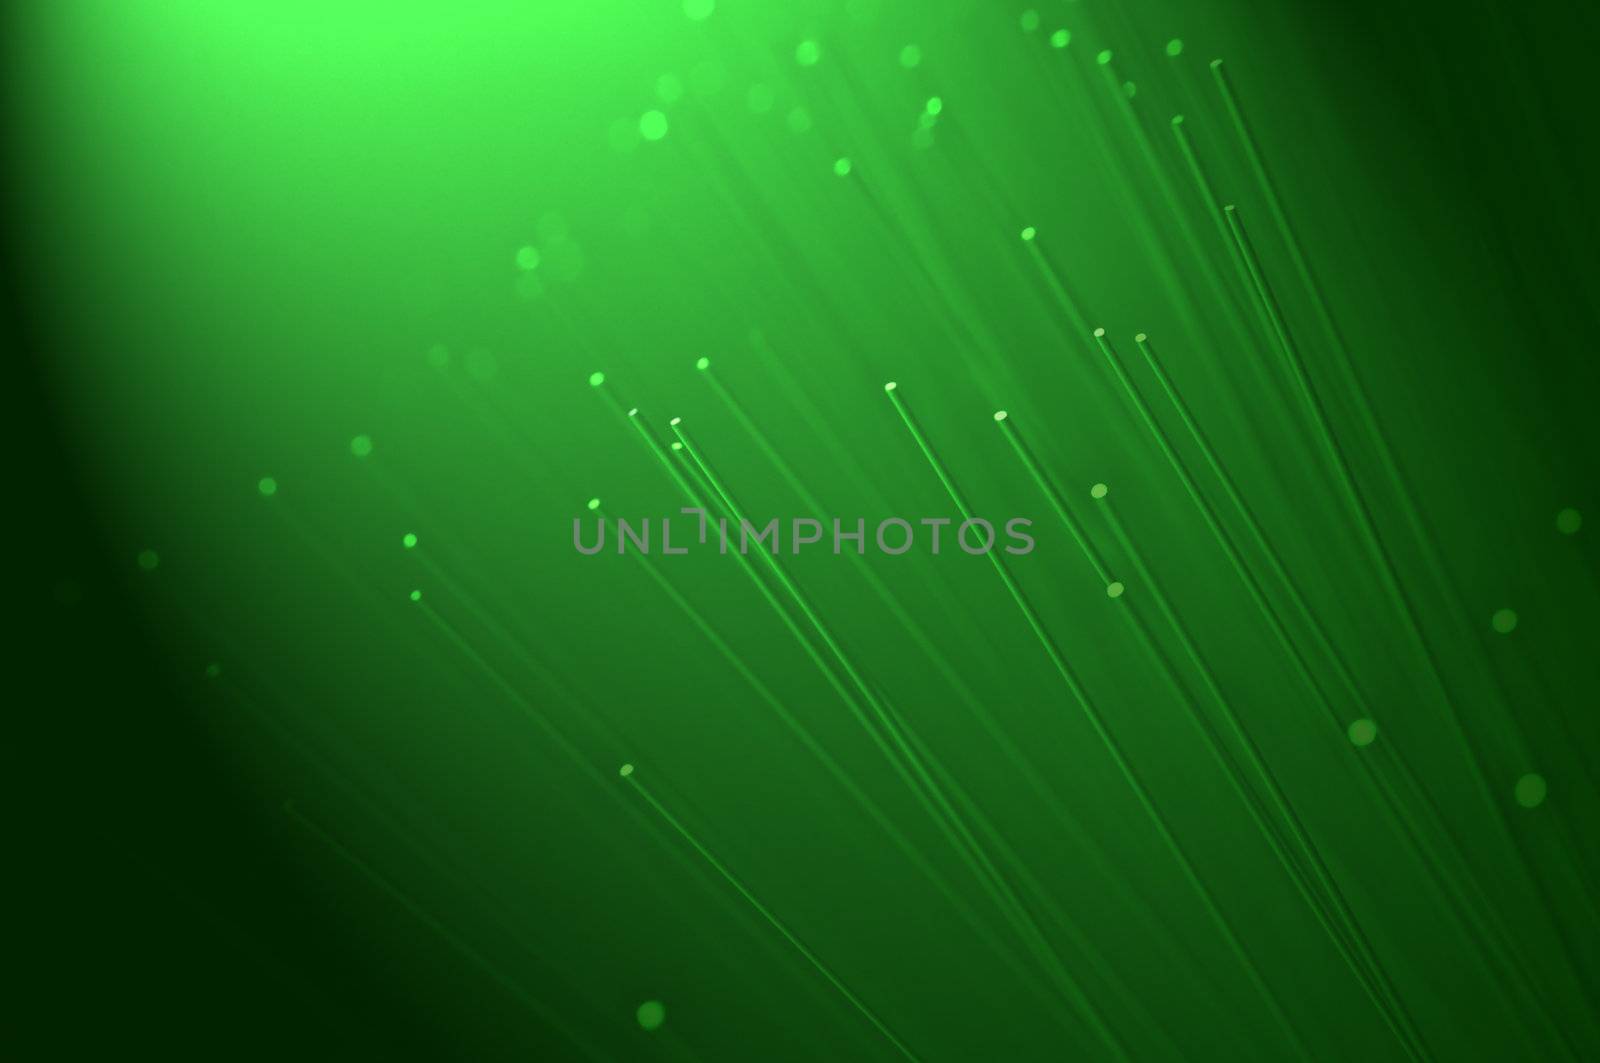 Many ends of green illuminated fiber optic light strands close up with green light effect